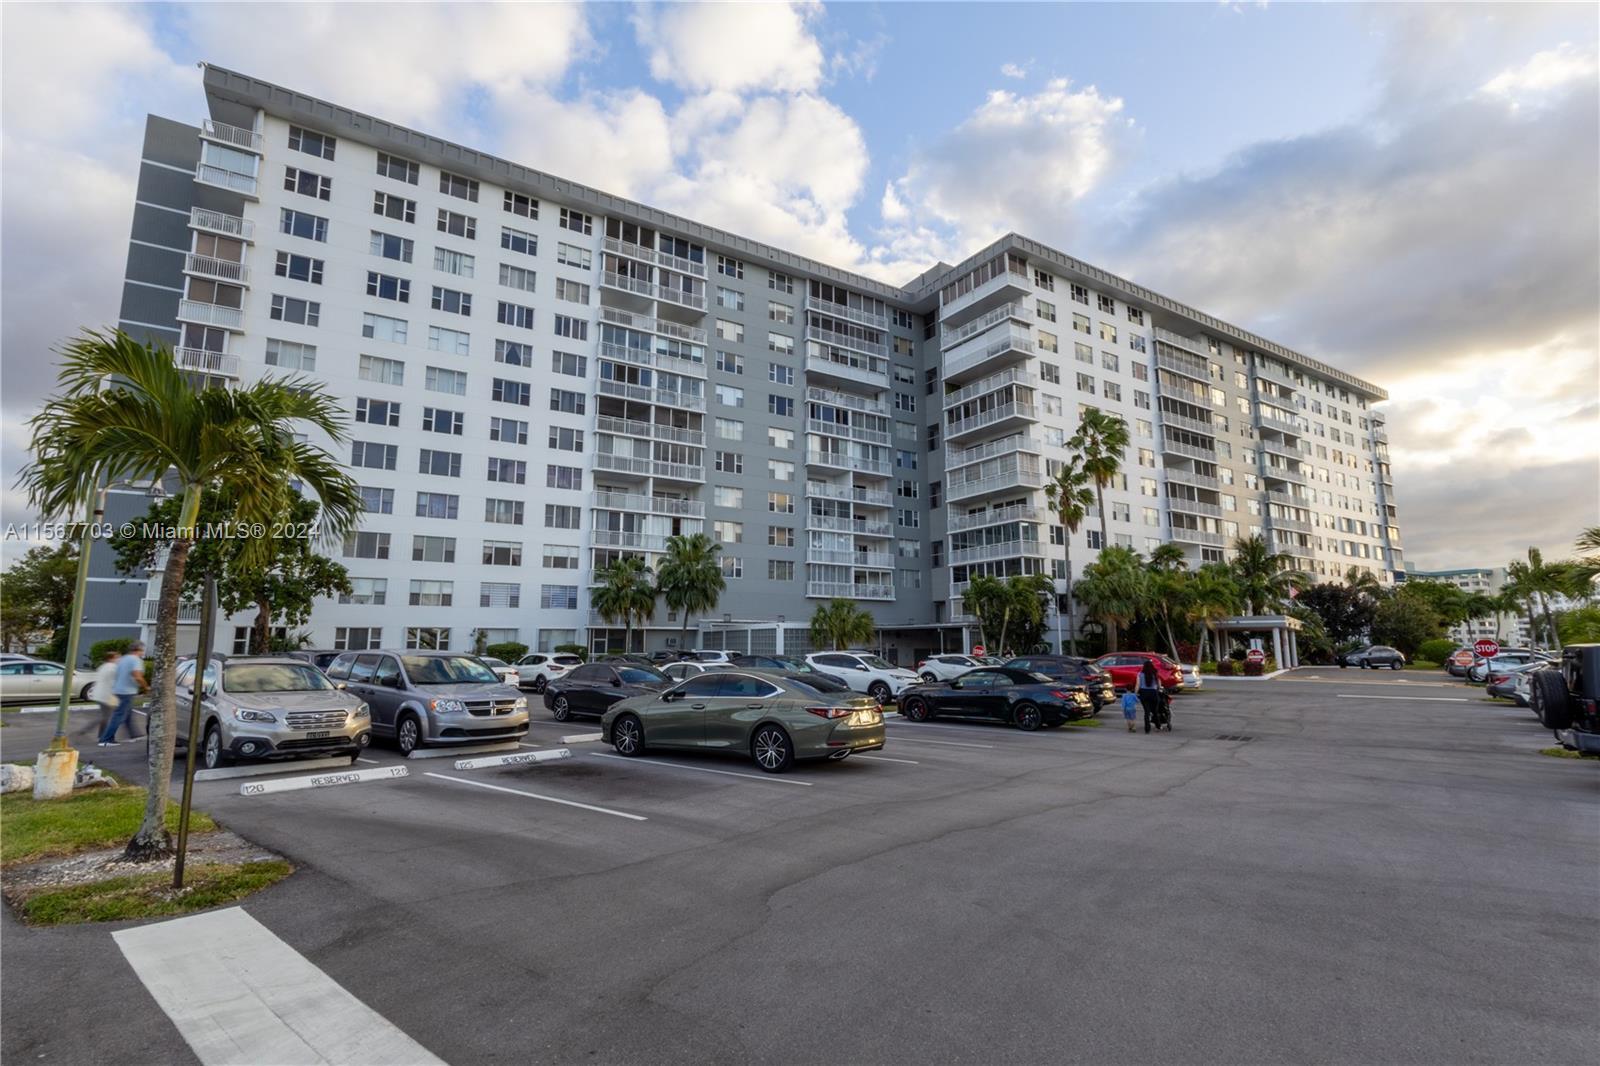 Photo of 3800 Hillcrest Dr #310 in Hollywood, FL